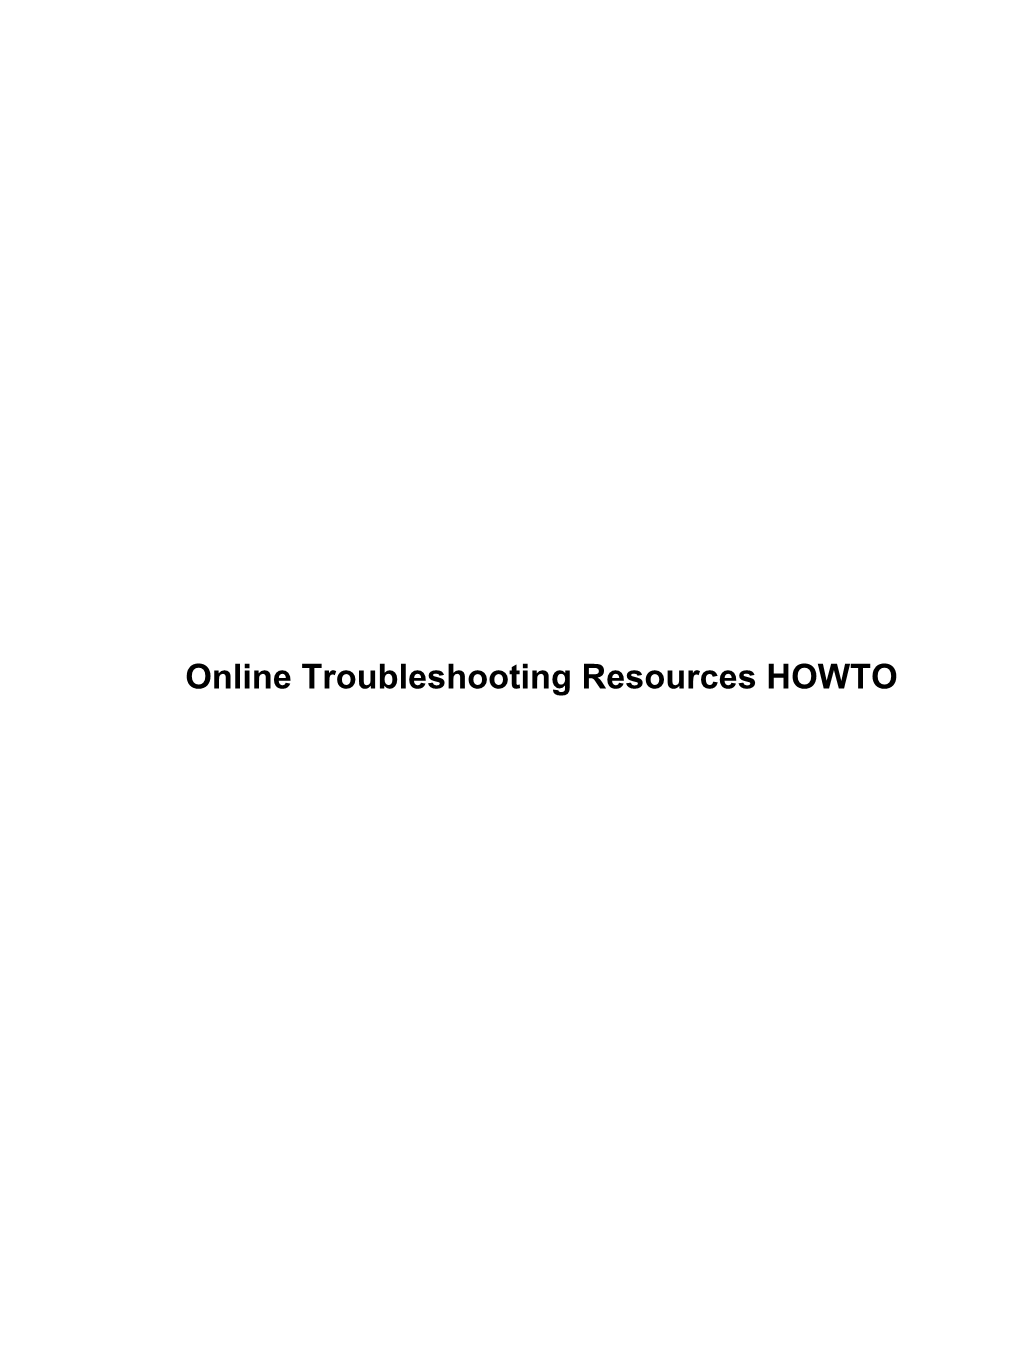 Online Troubleshooting Resources HOWTO Online Troubleshooting Resources HOWTO